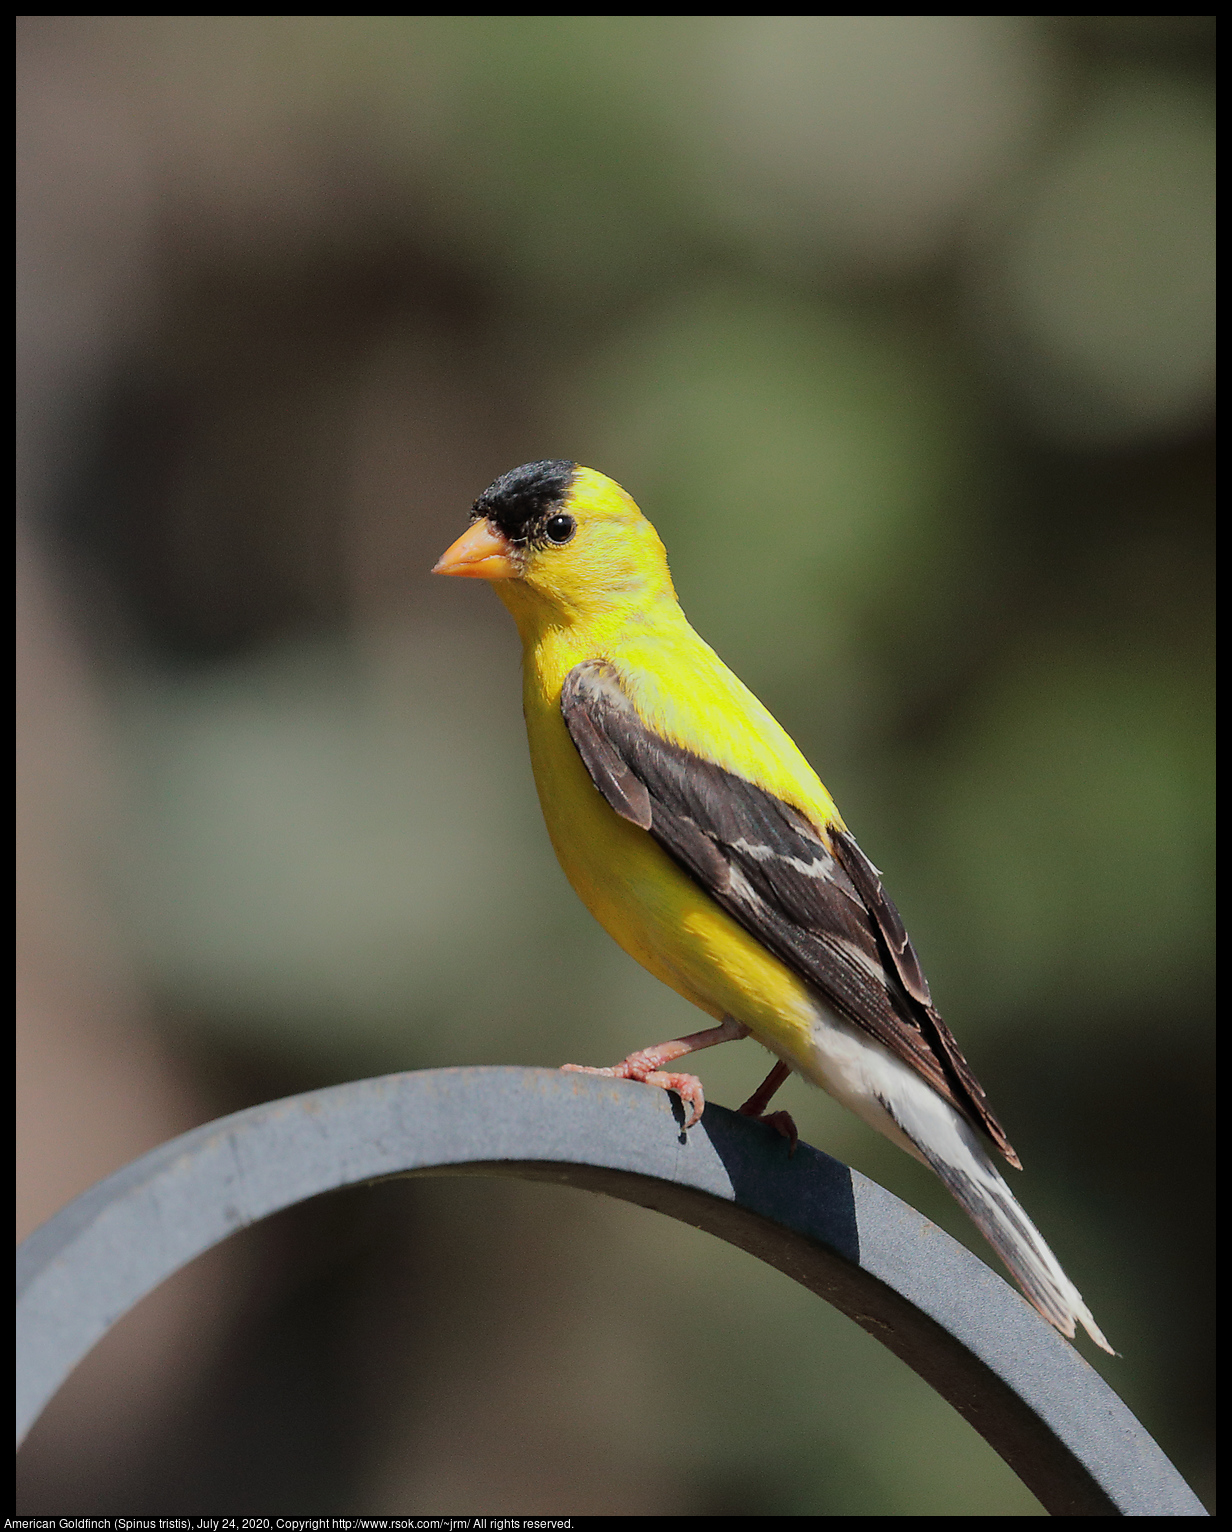 American Goldfinch (Spinus tristis), July 24, 2020